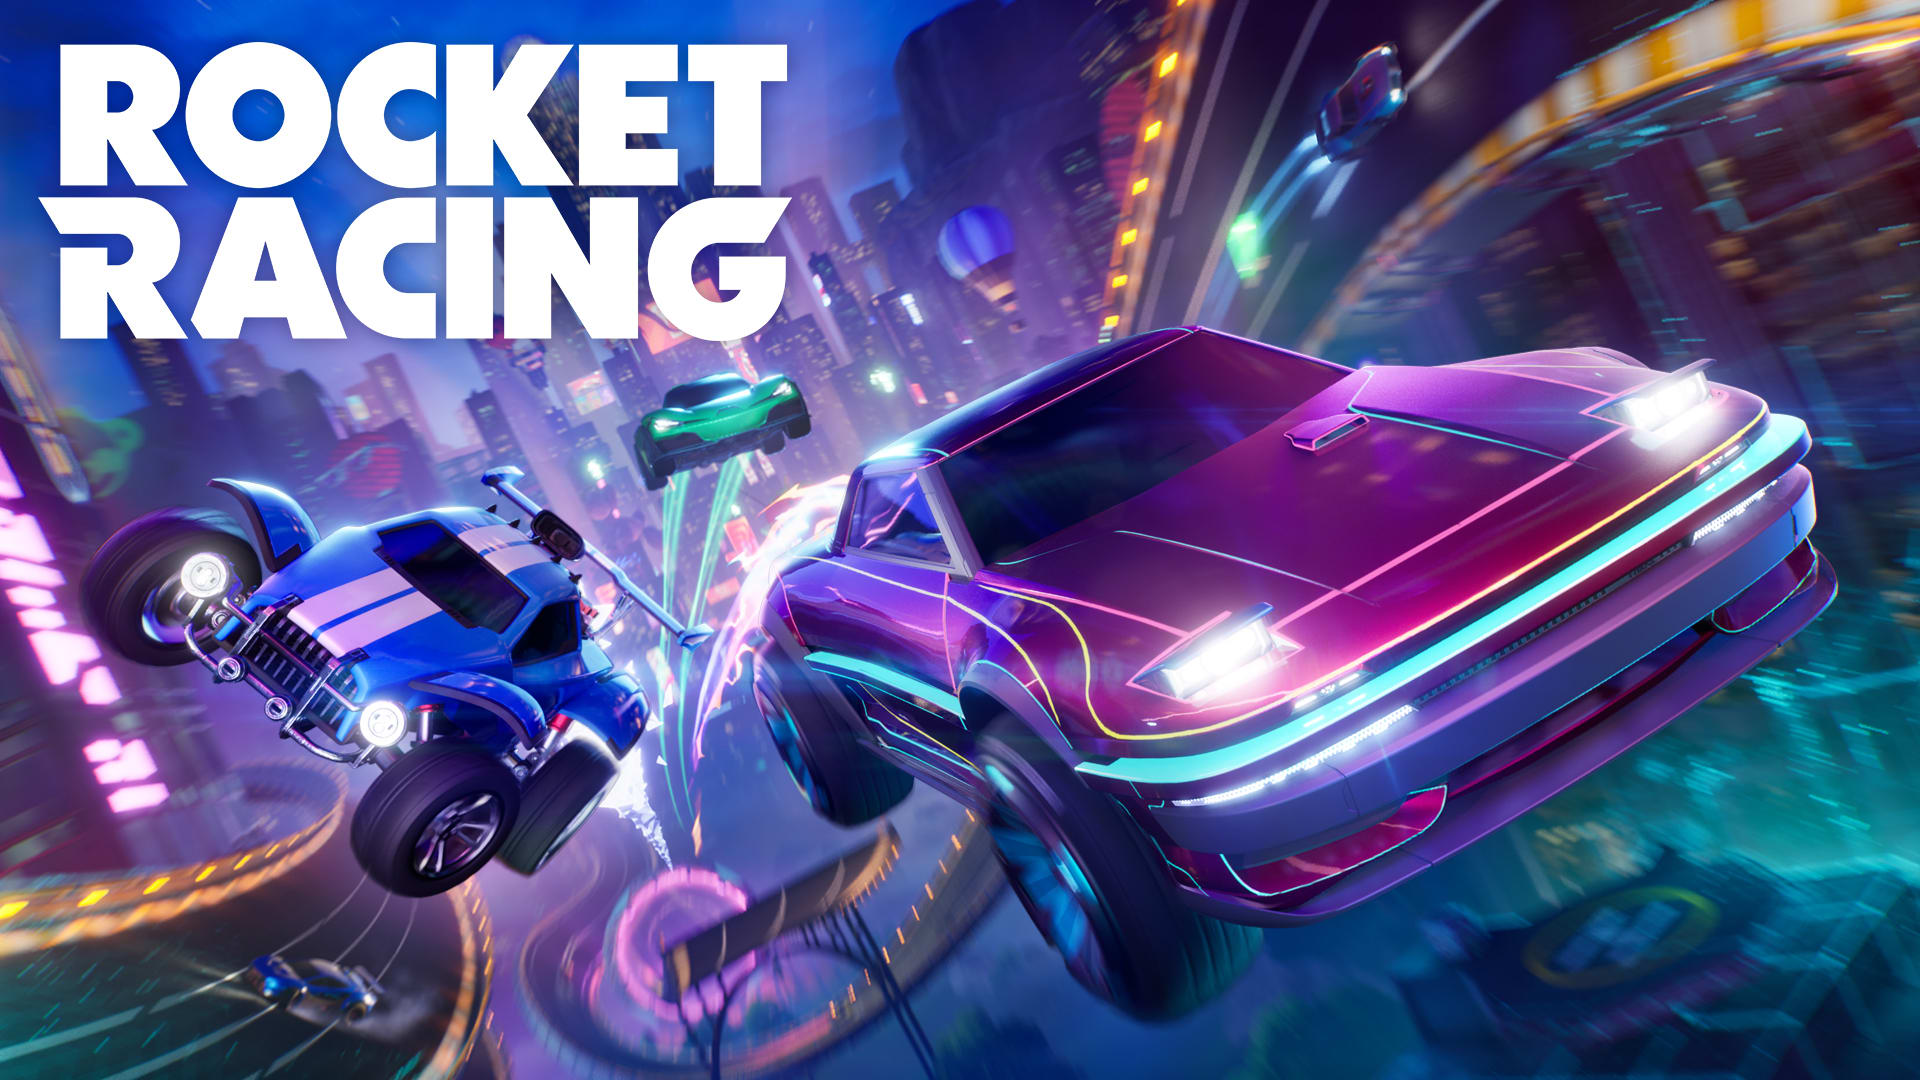 Fortnite Rocket Racing Neon Rush poster showing cars flying through a neon-lit cityscape.